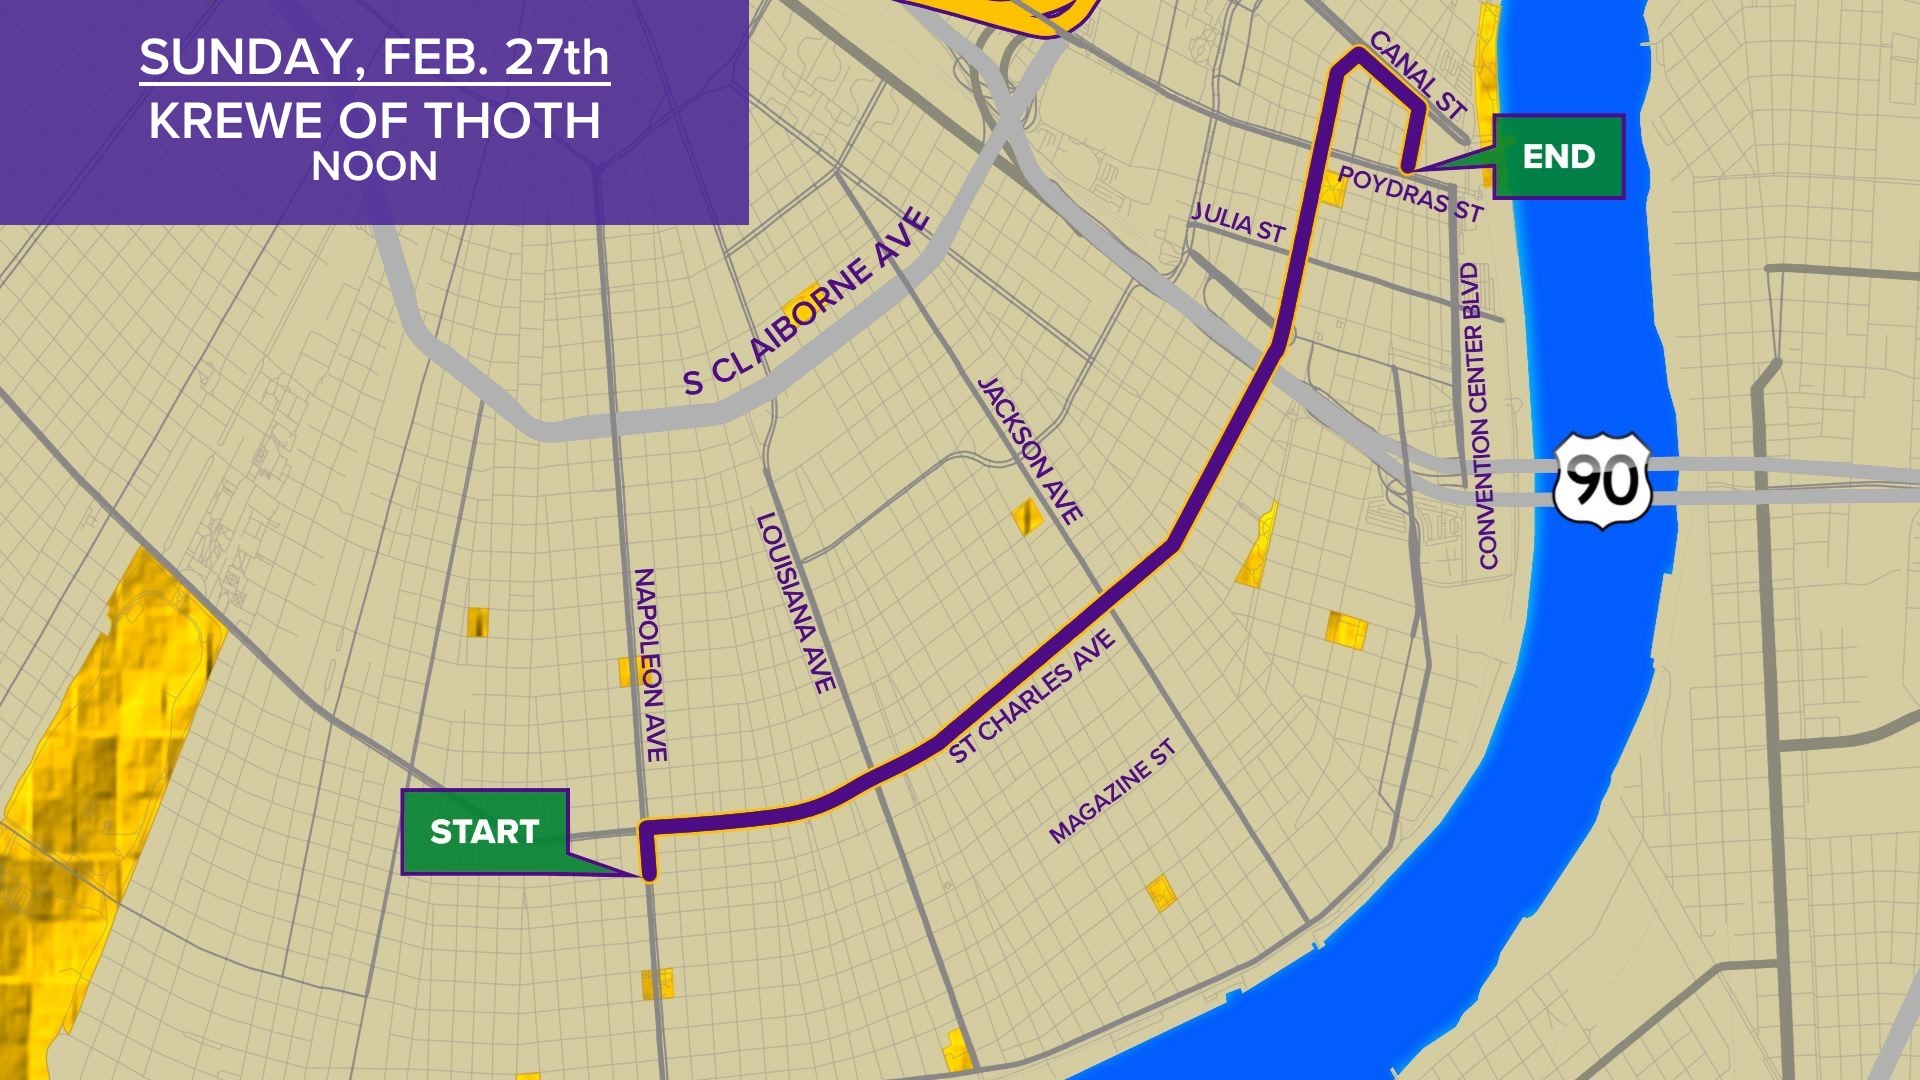 Krewe of Thoth parade route 2022 and start time